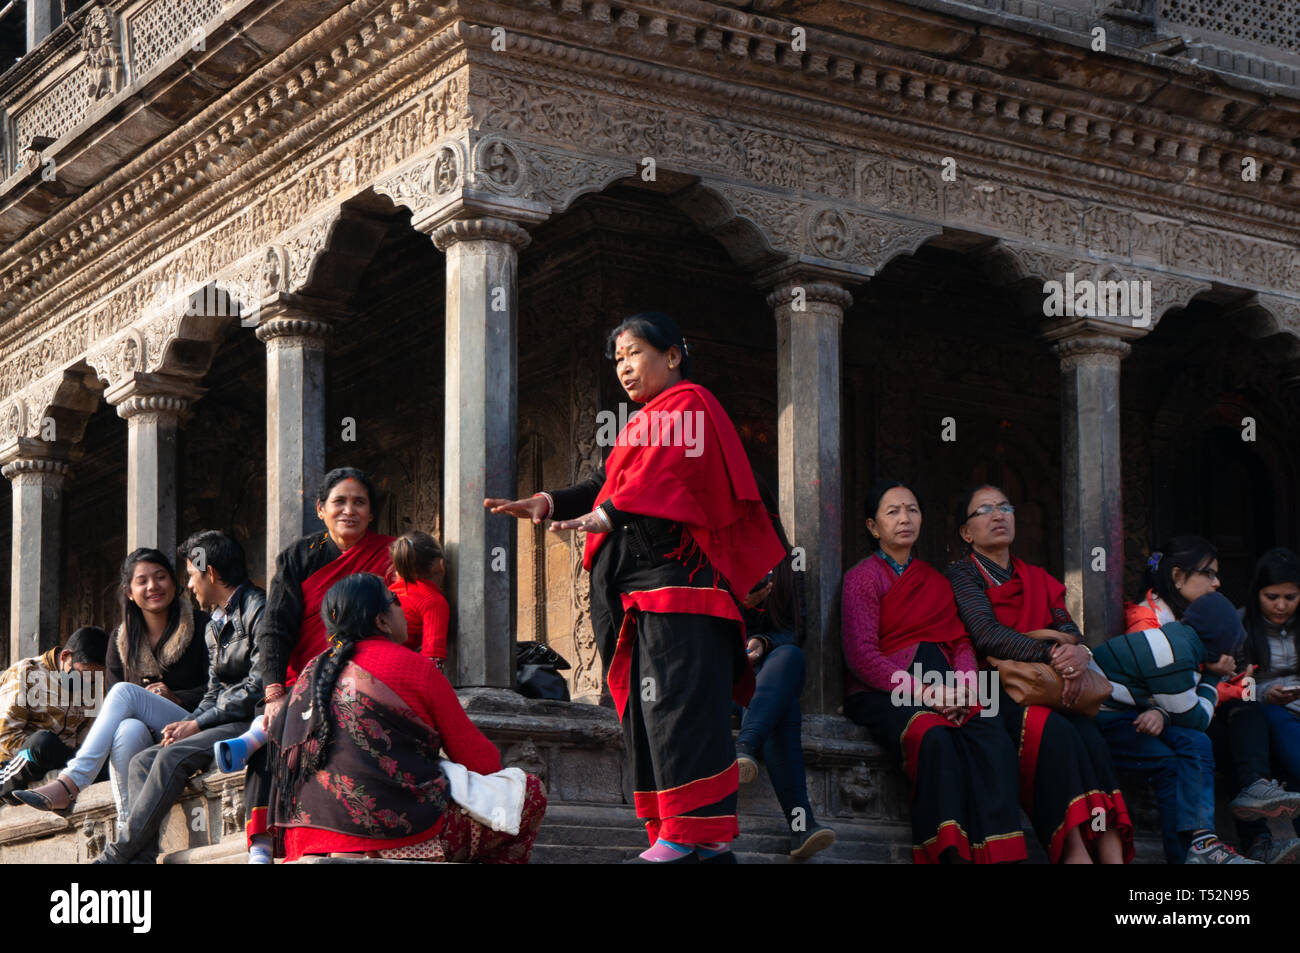 Kathmandu, Nepal - January 15, 2016: Local women in Newari traditional attire engages in conversation. Some people sitting aside talking together. Stock Photo